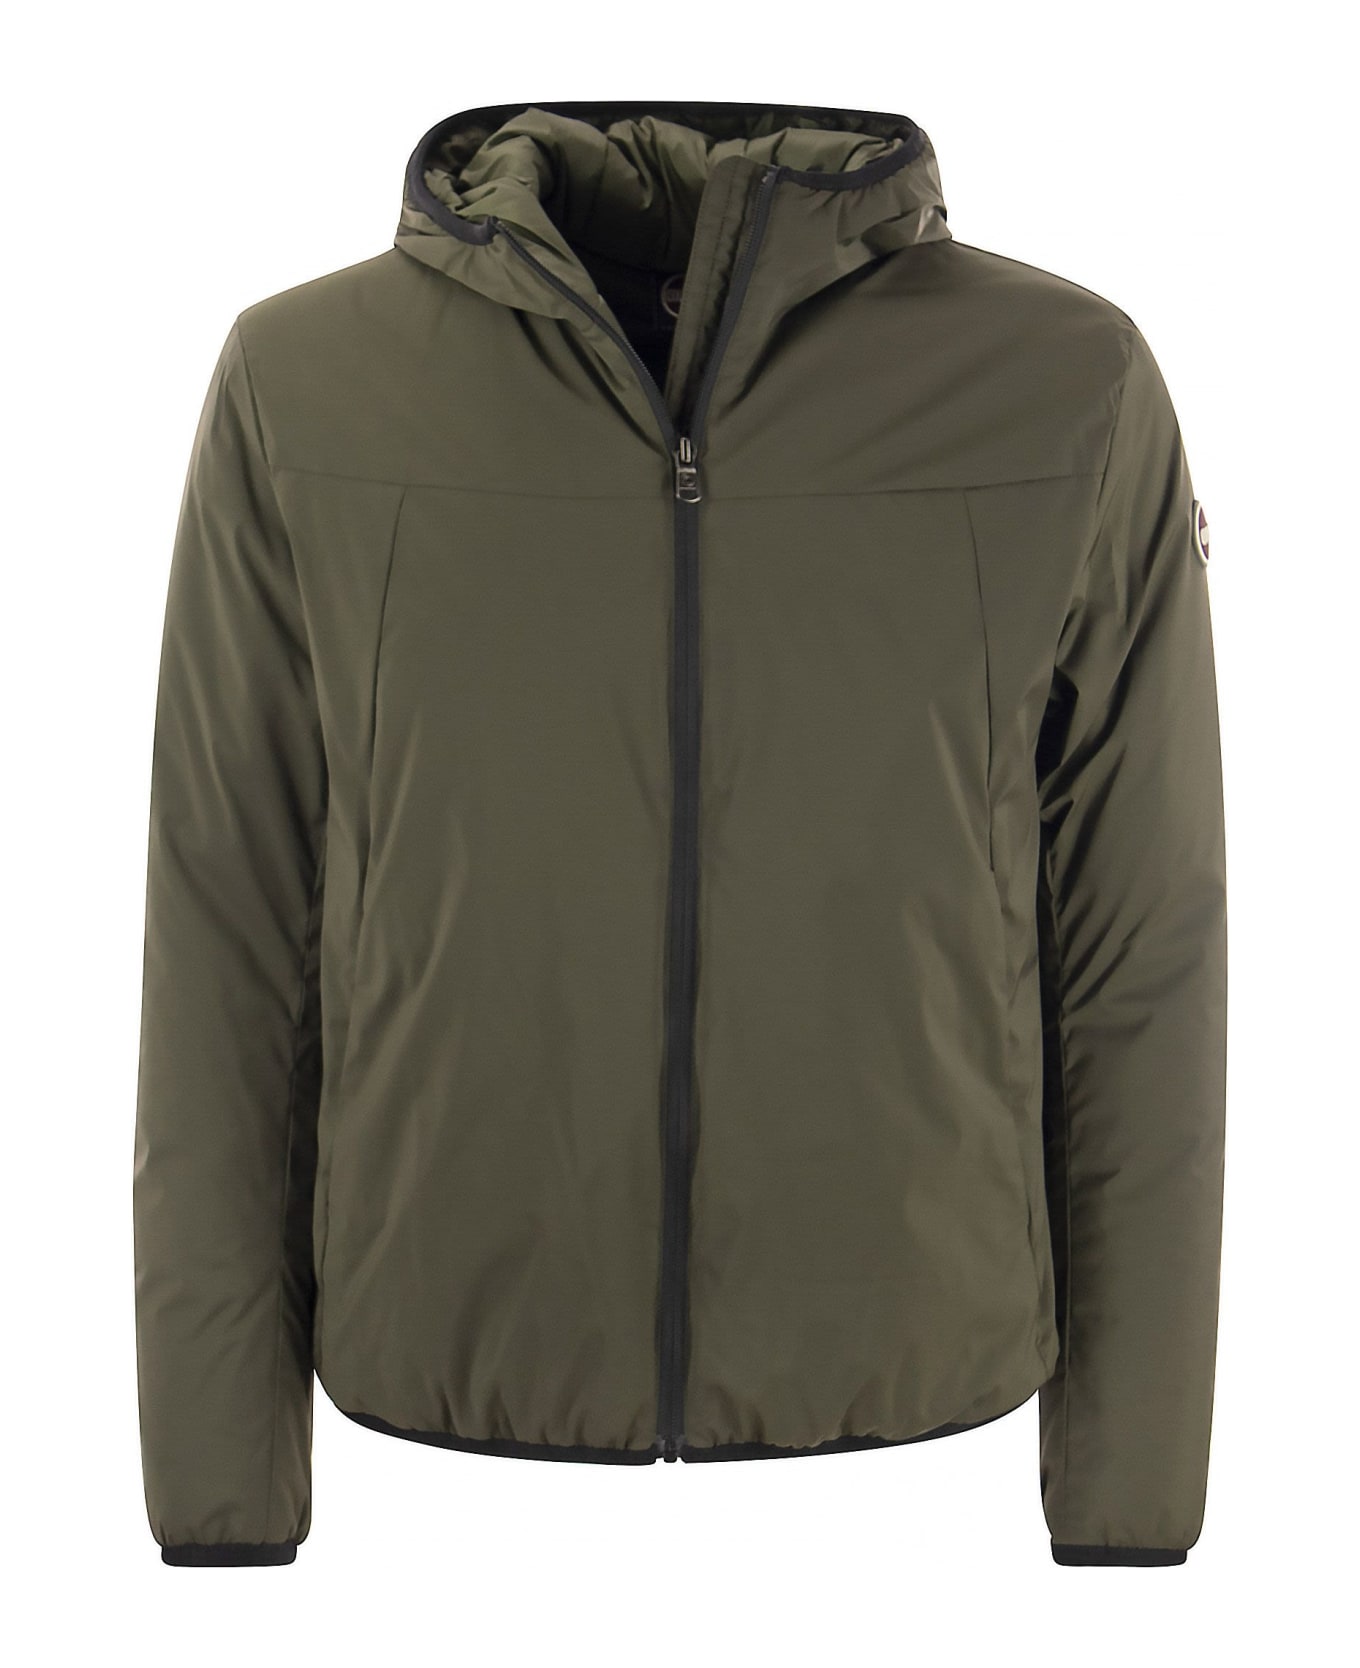 Colmar Otherwise - Hooded Jacket In Stretch Fabric - Military